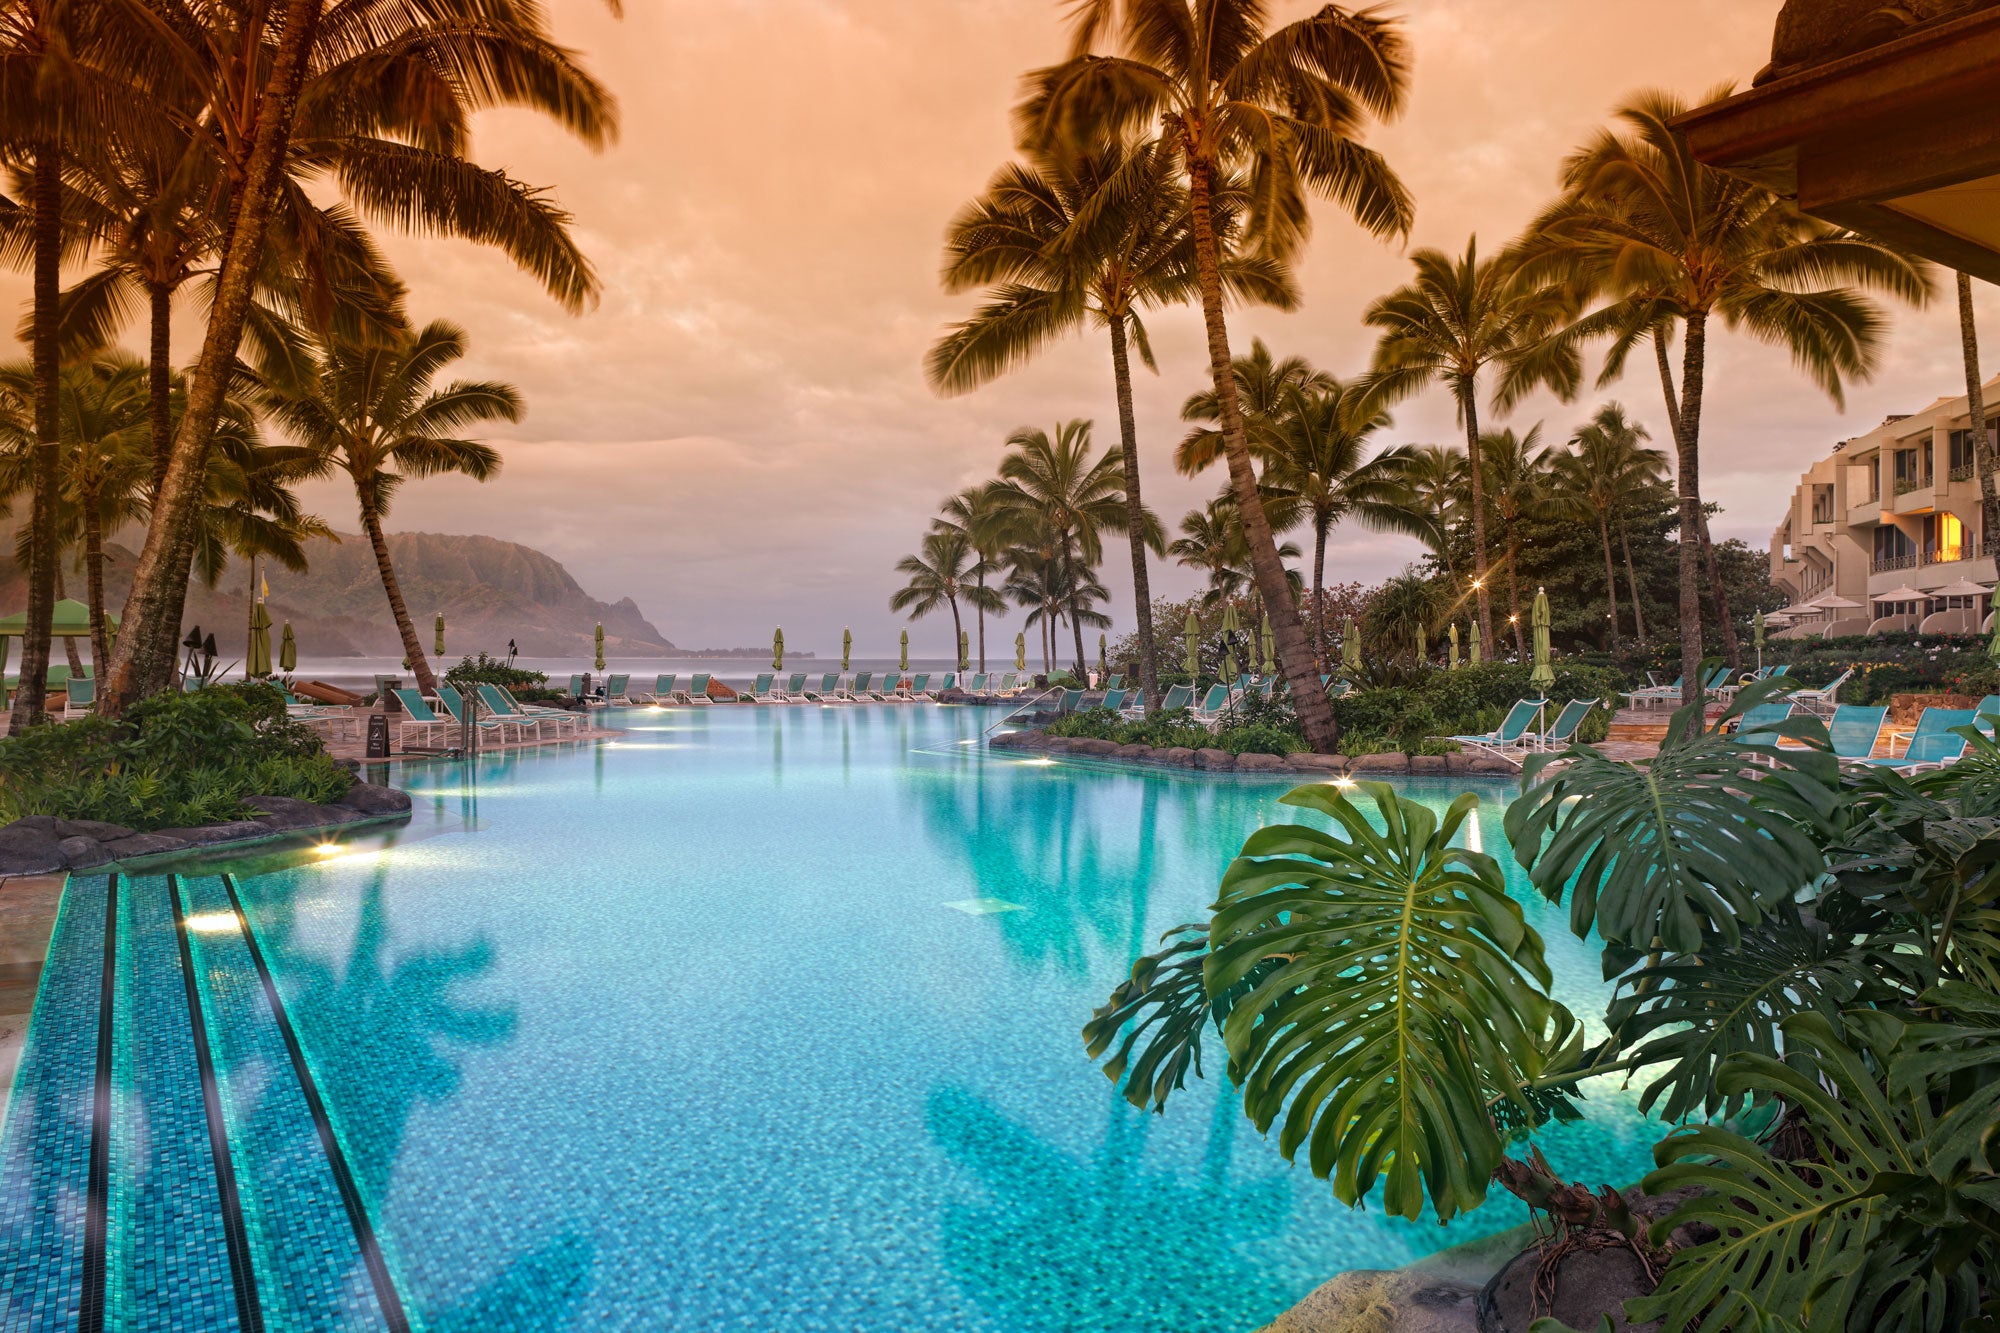 Luxury resort in Hawaii with pool and palm trees